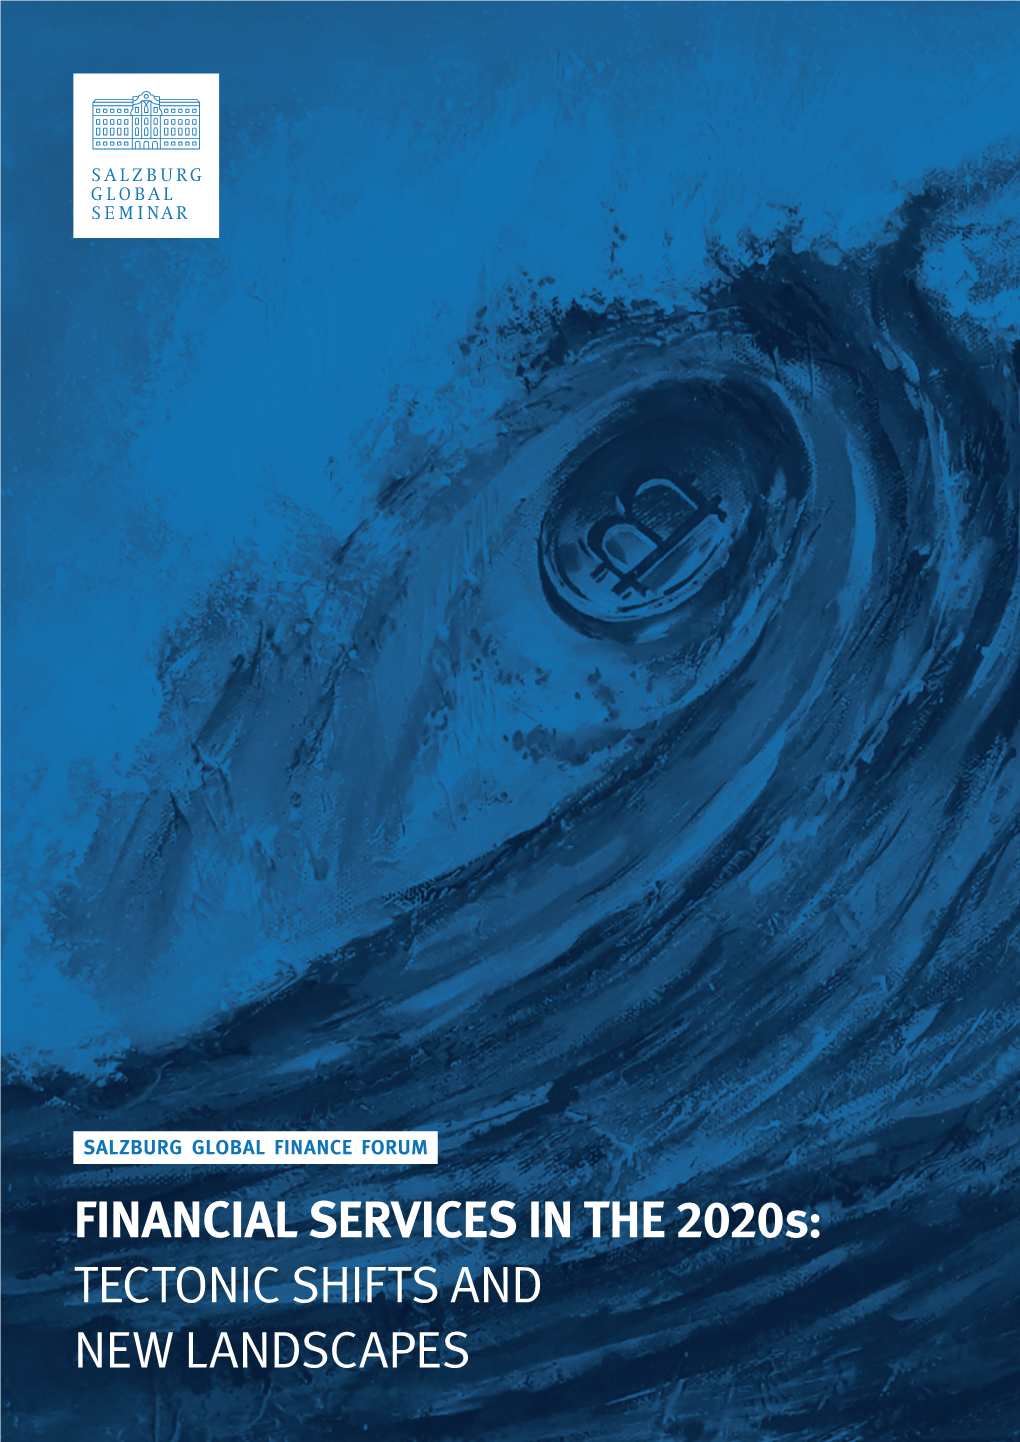 FINANCIAL SERVICES in the 2020S: TECTONIC SHIFTS AND